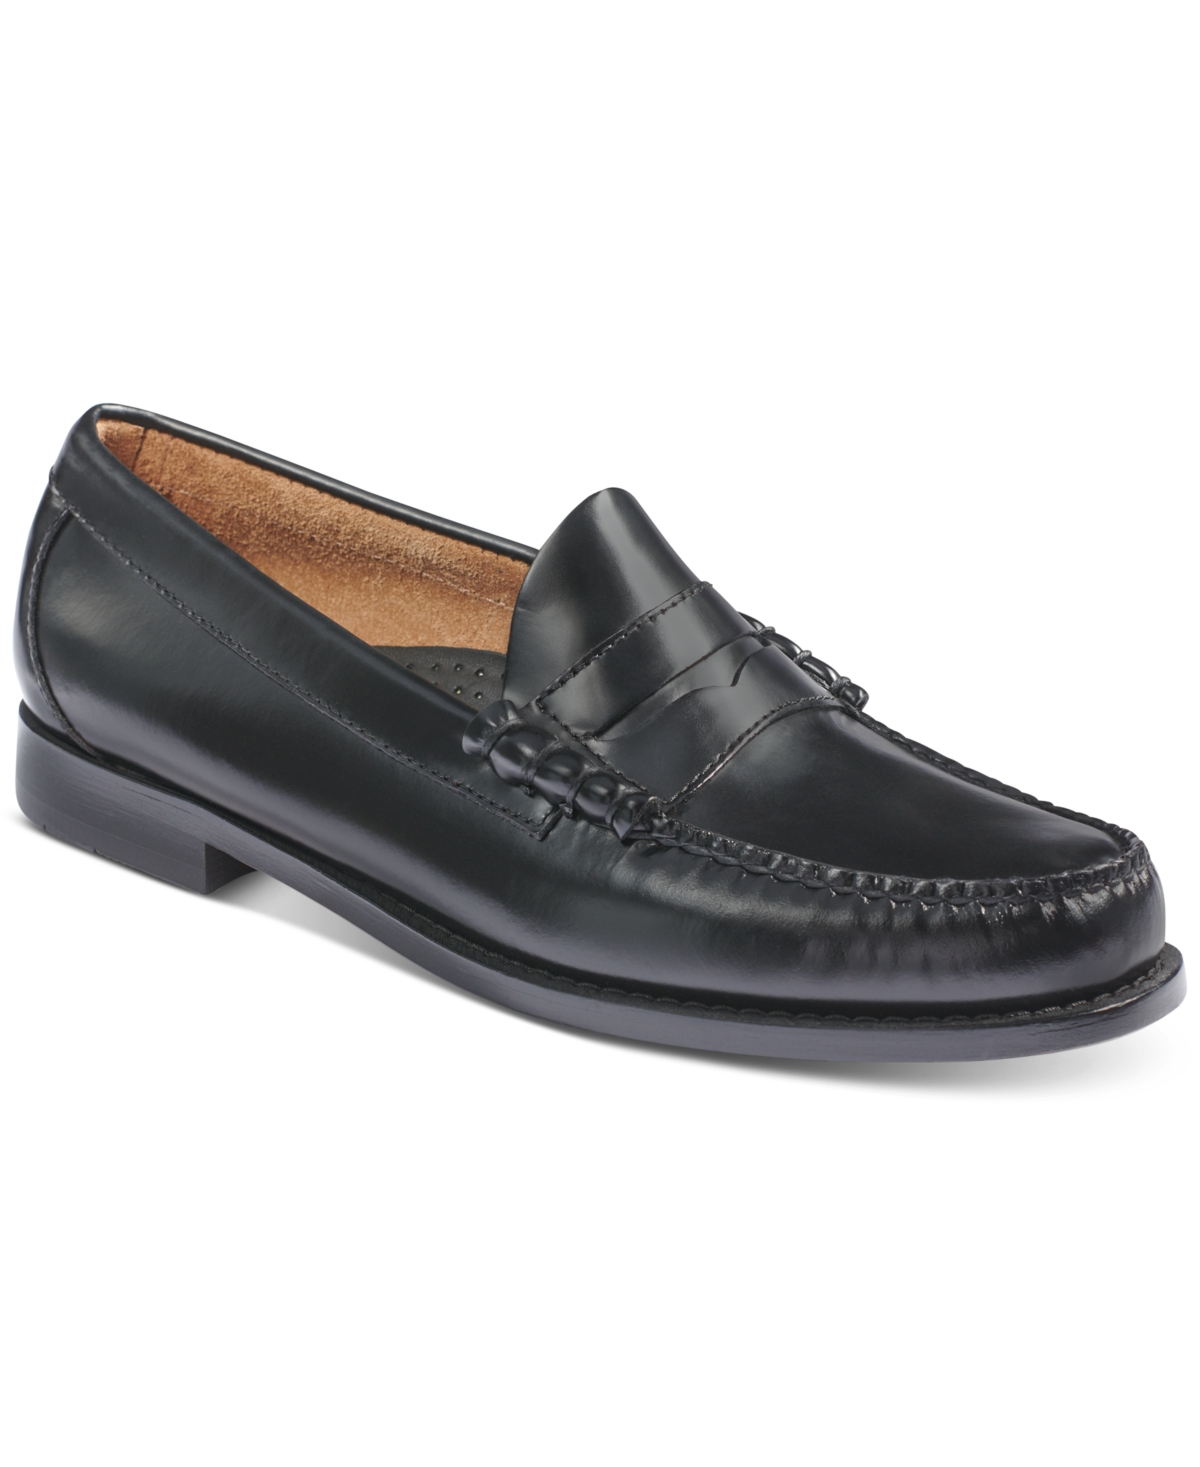 G.h.bass Men's Larson Weejuns Loafers - Black